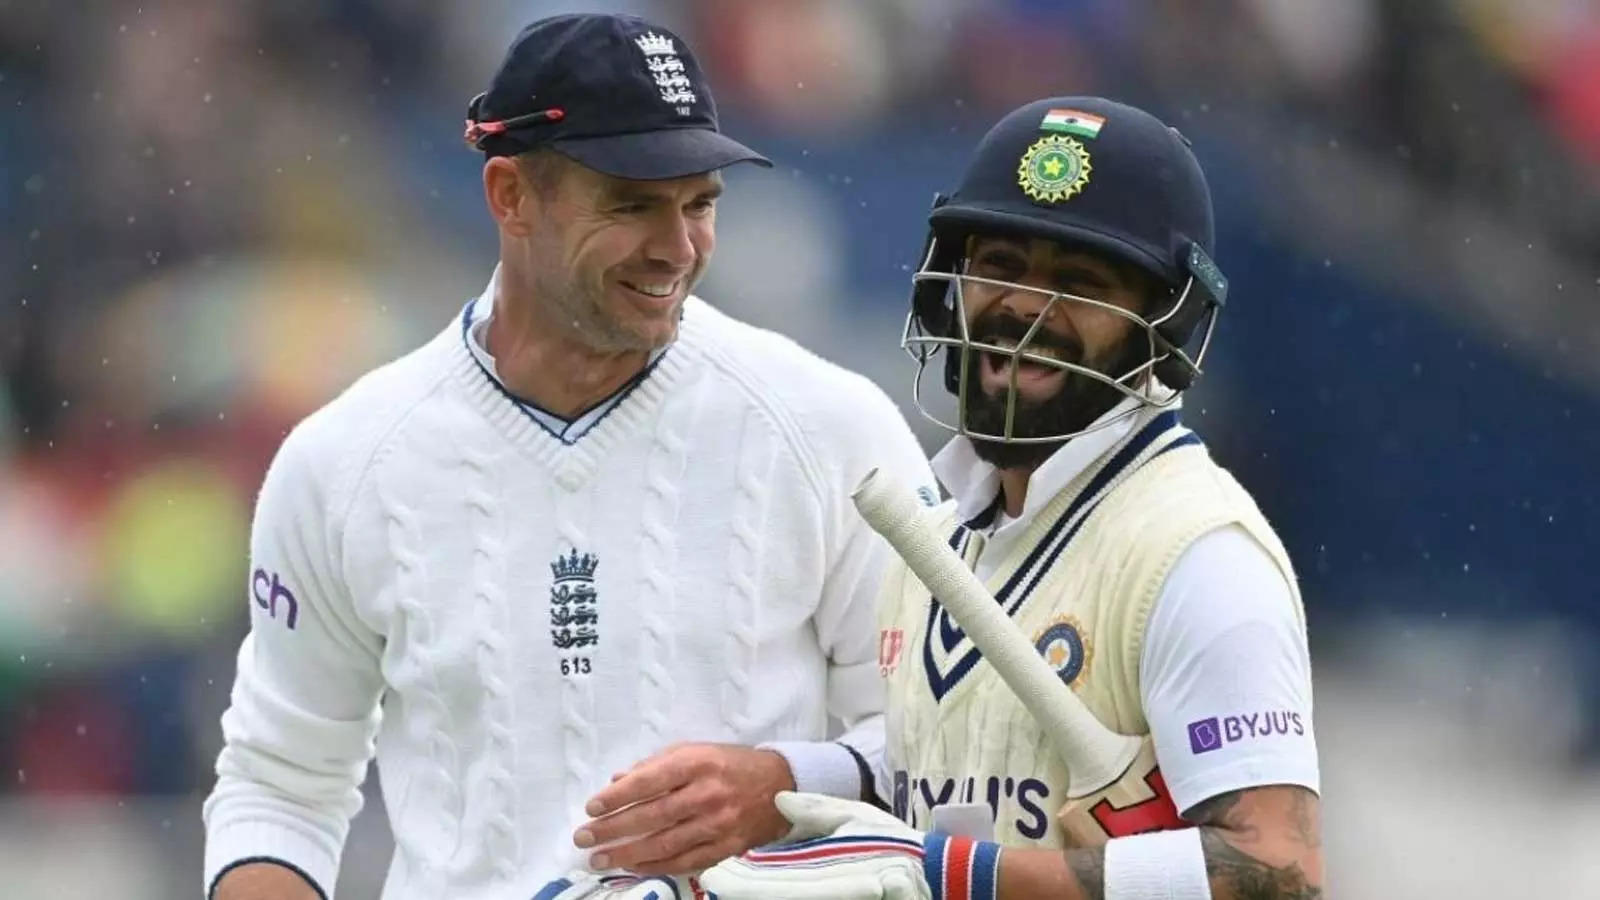 Virat Kohli James Anderson shares ICC laughing caption contest for photo receives hilarious responses